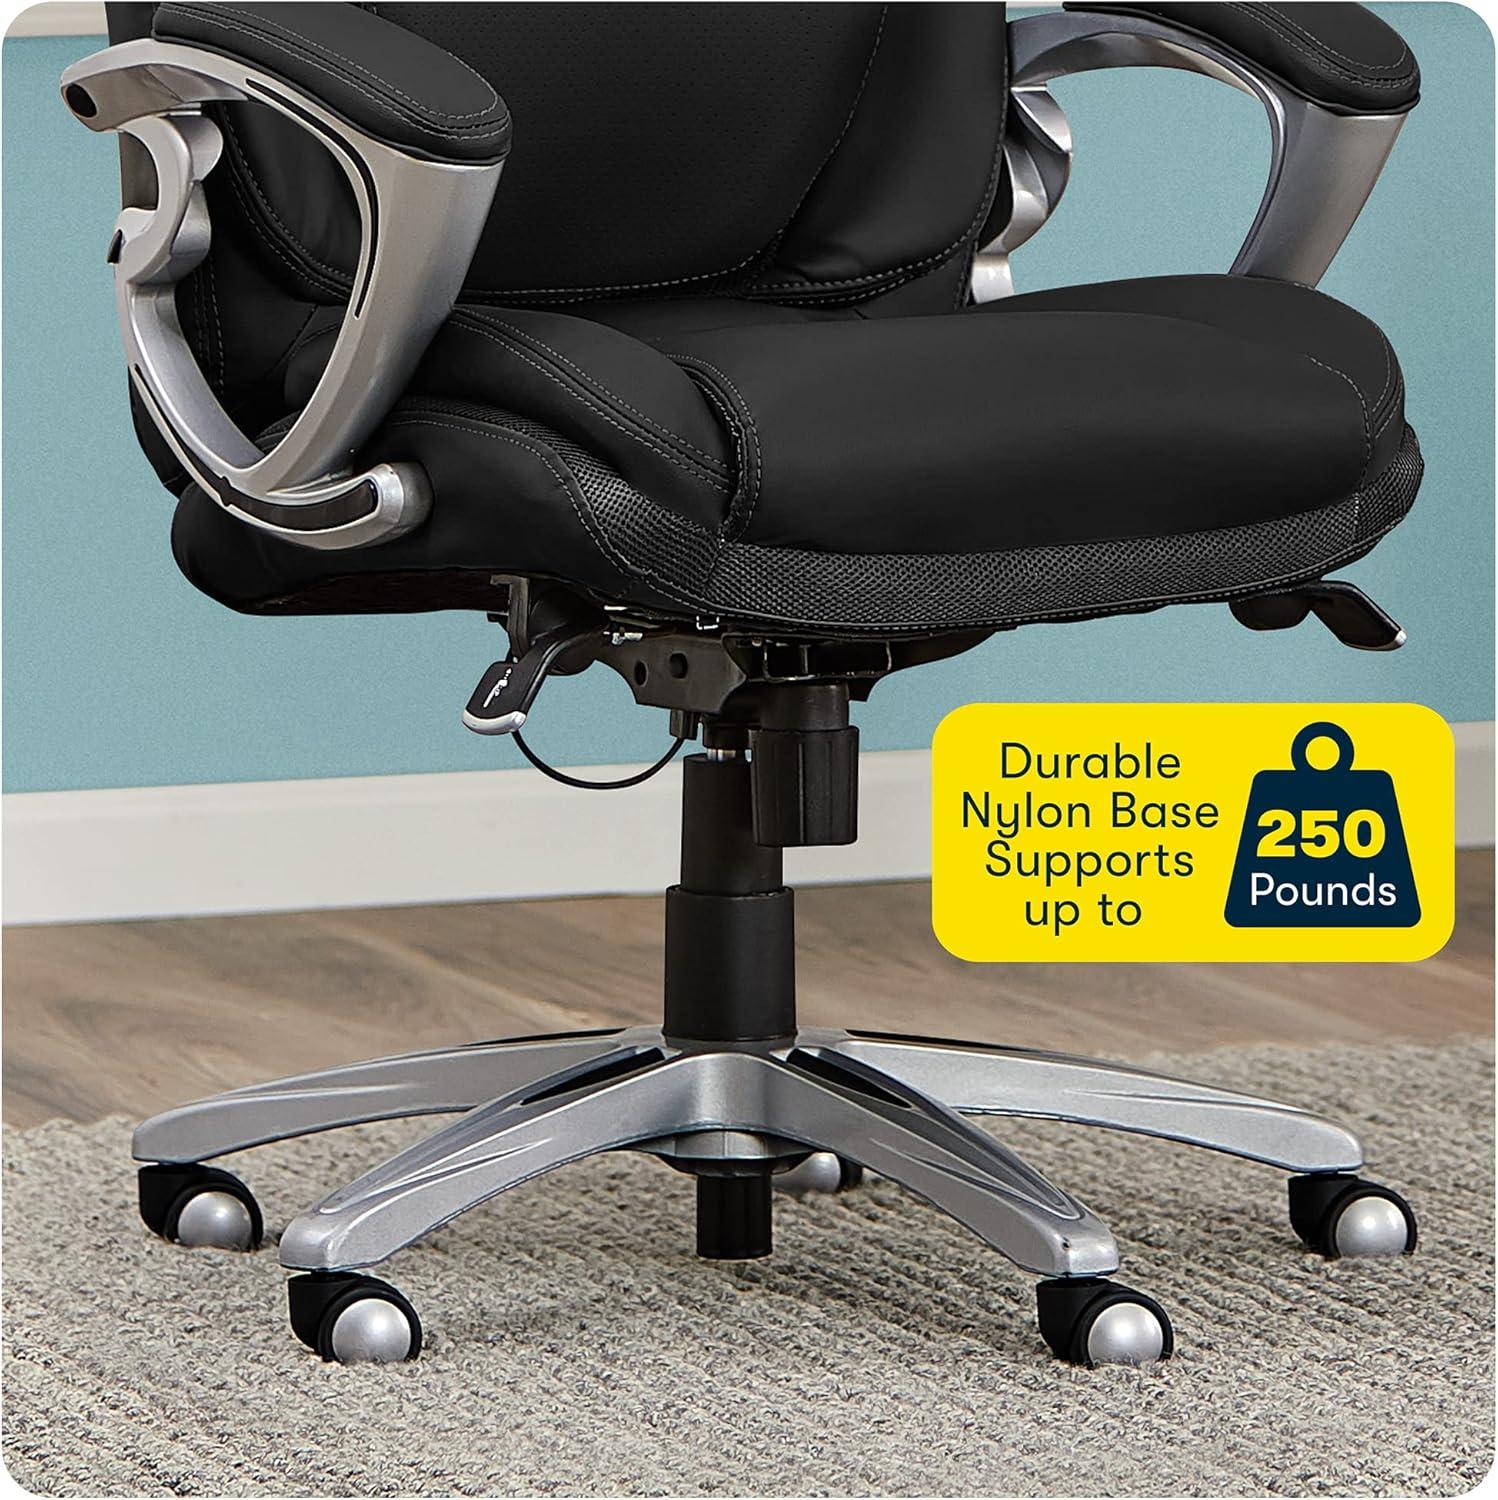 Serta Bryce High-Back Swivel Executive Chair with AIR Lumbar Support, Black Leather